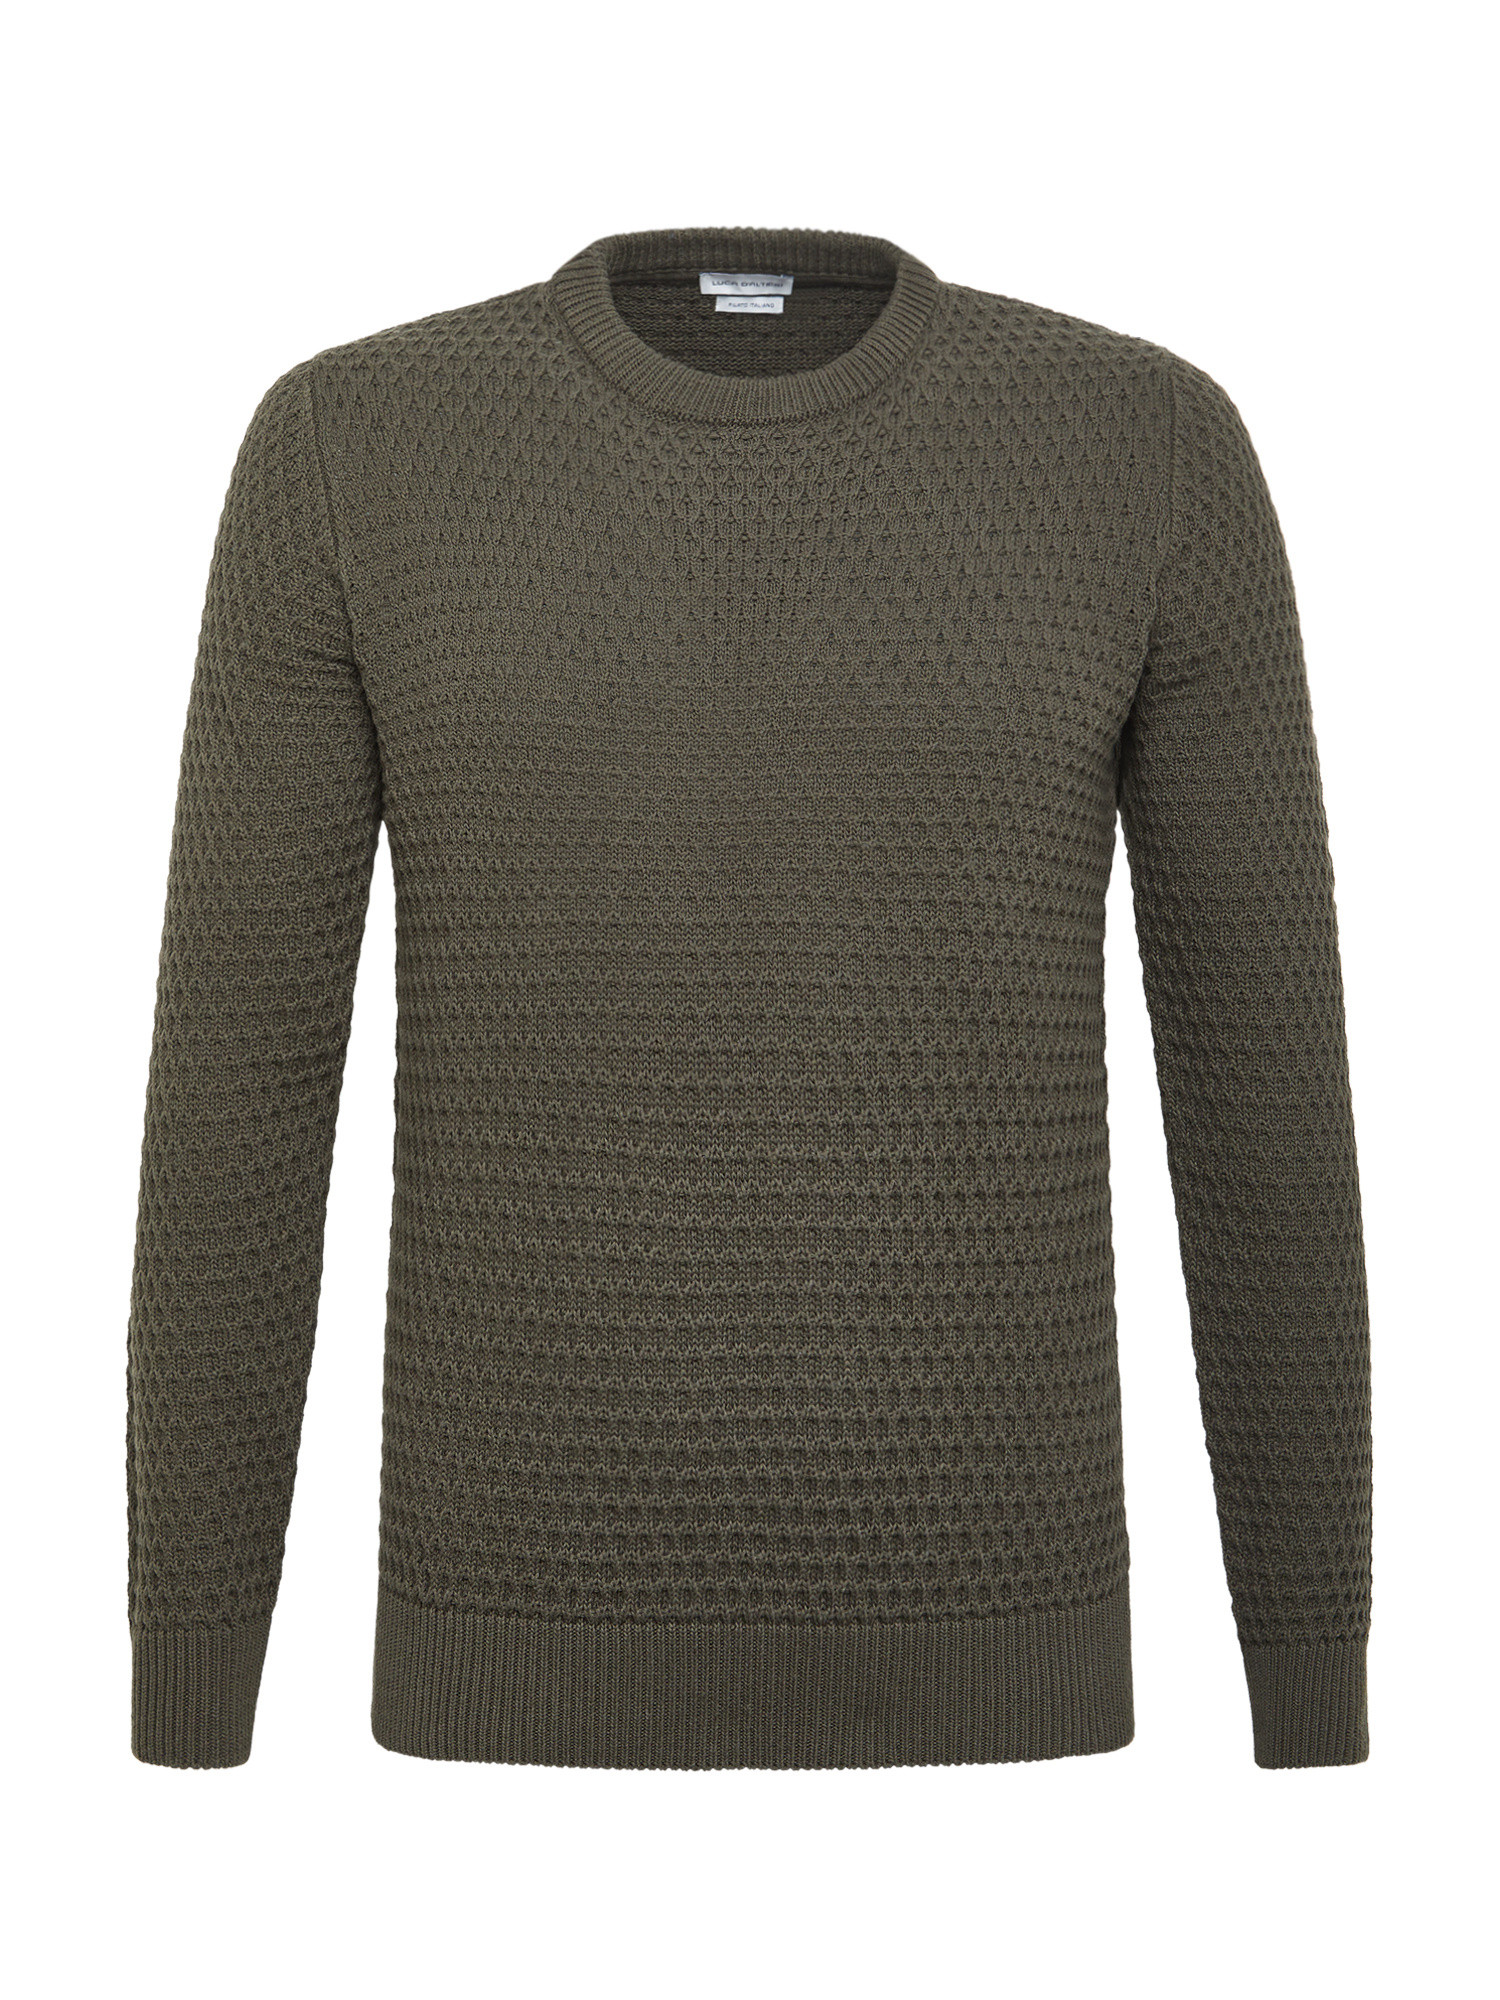 Luca D'Altieri - Eco-friendly cotton crew neck sweater, Green, large image number 0